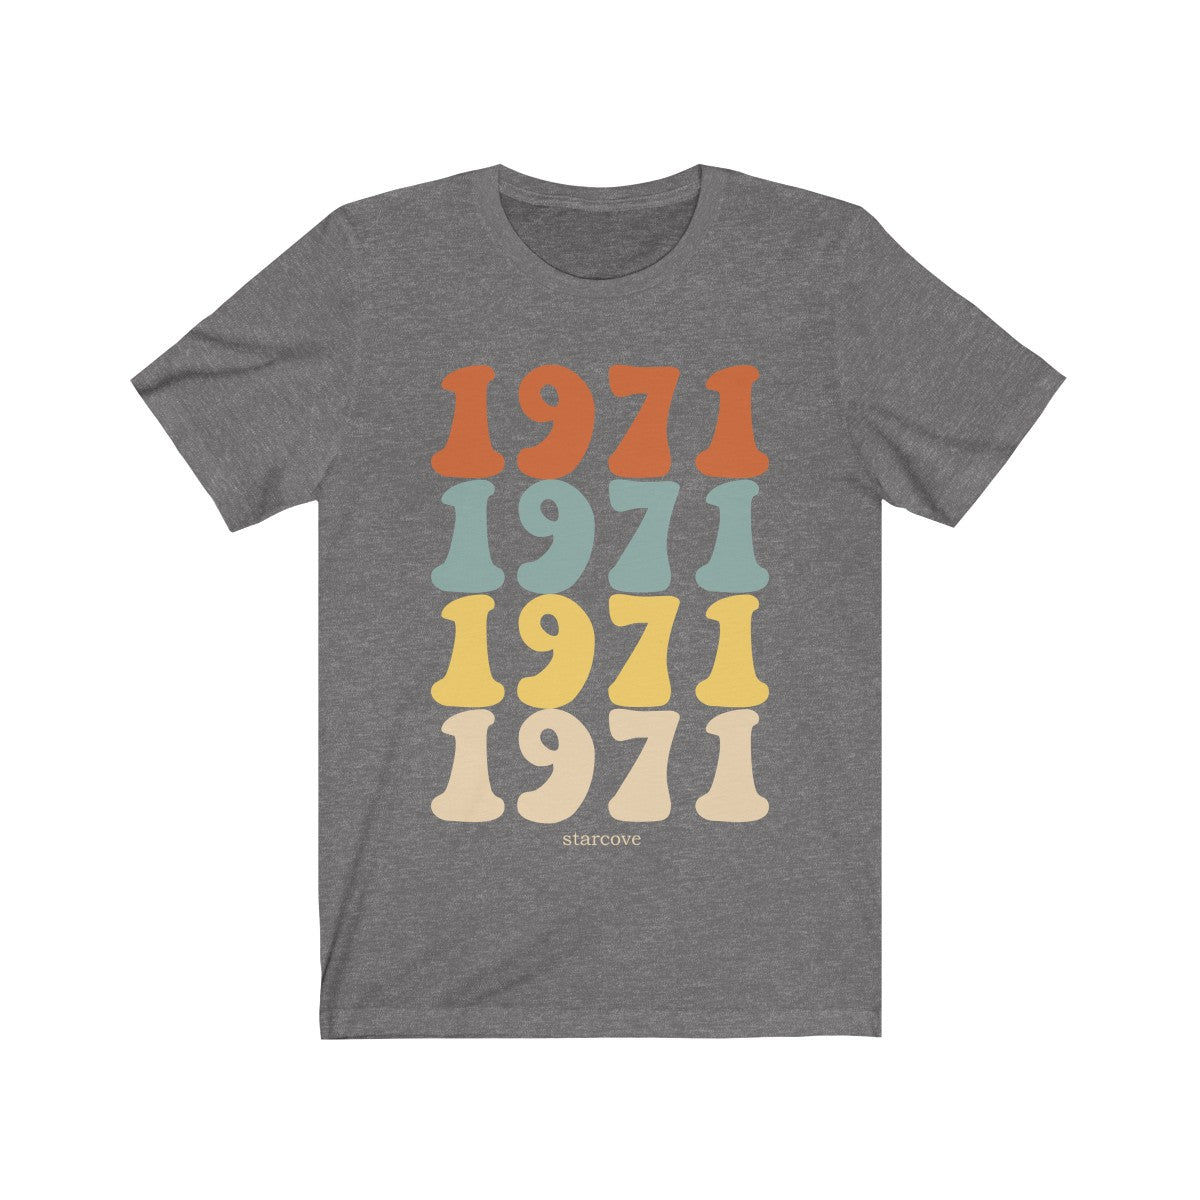 1971 shirt, 51st Birthday Party Turning 51 Years Old, 70s Retro Vintage gift Idea Women Men, Born Made in 1971 Funny Present Mom Dad TShirt Starcove Fashion